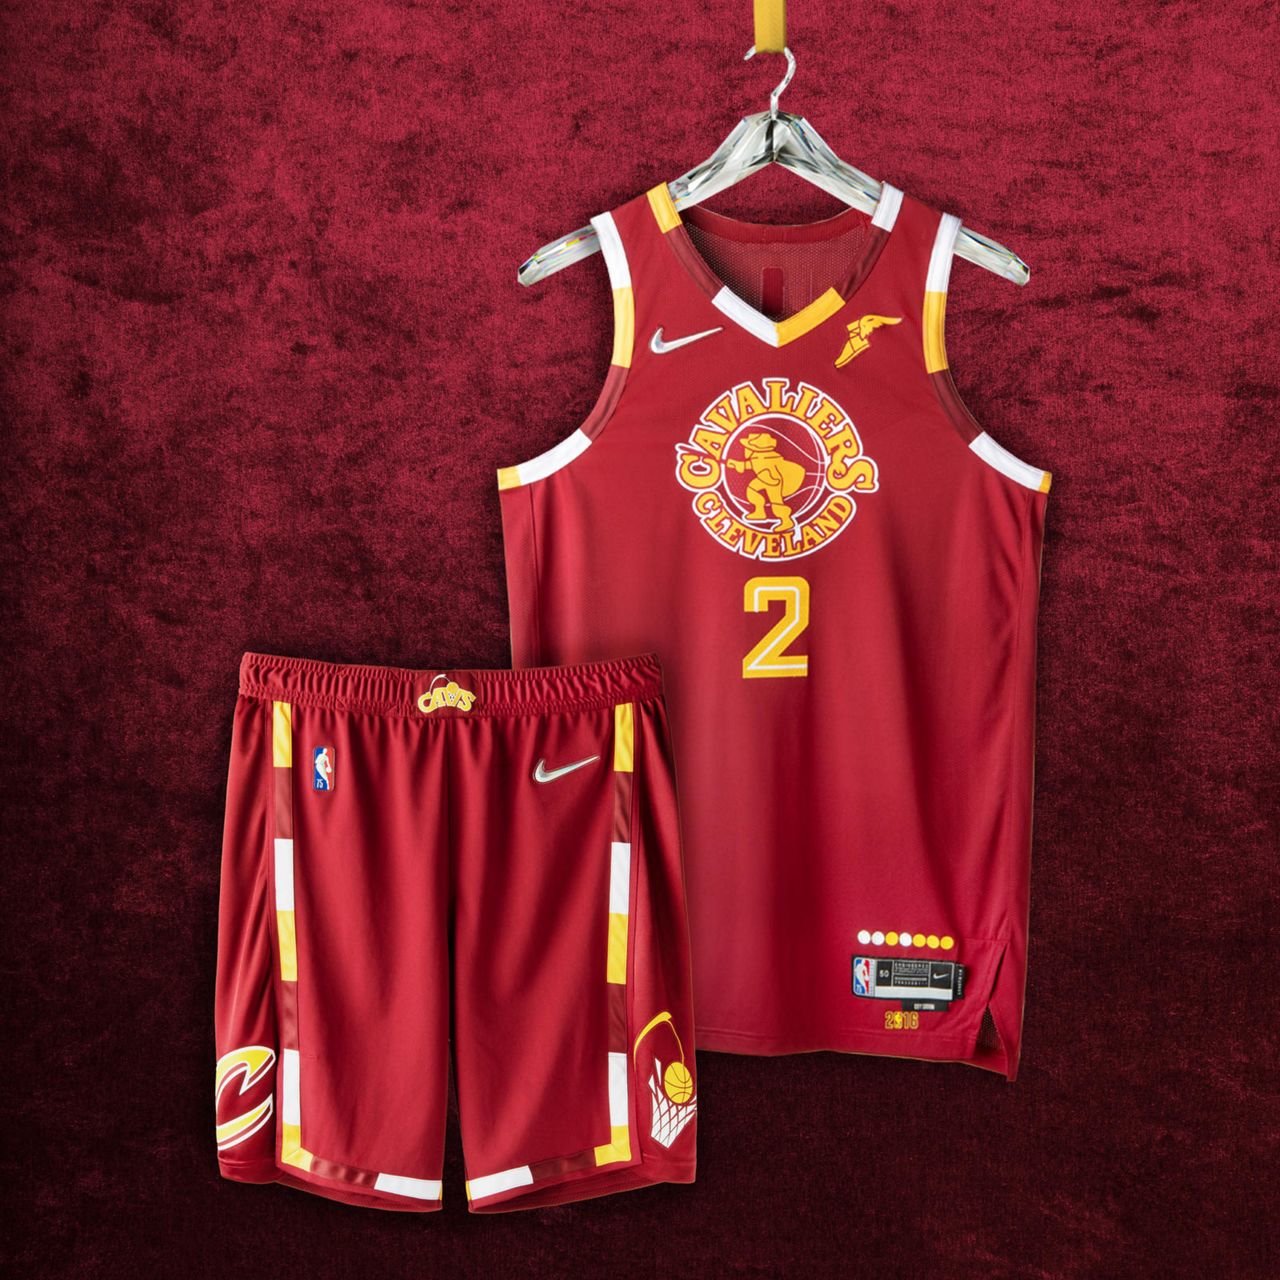 New uniform designs? I was searching for any news about the Cavs new  uniforms and these popped up on this website. I can't find them anywhere  else. I know they haven't been